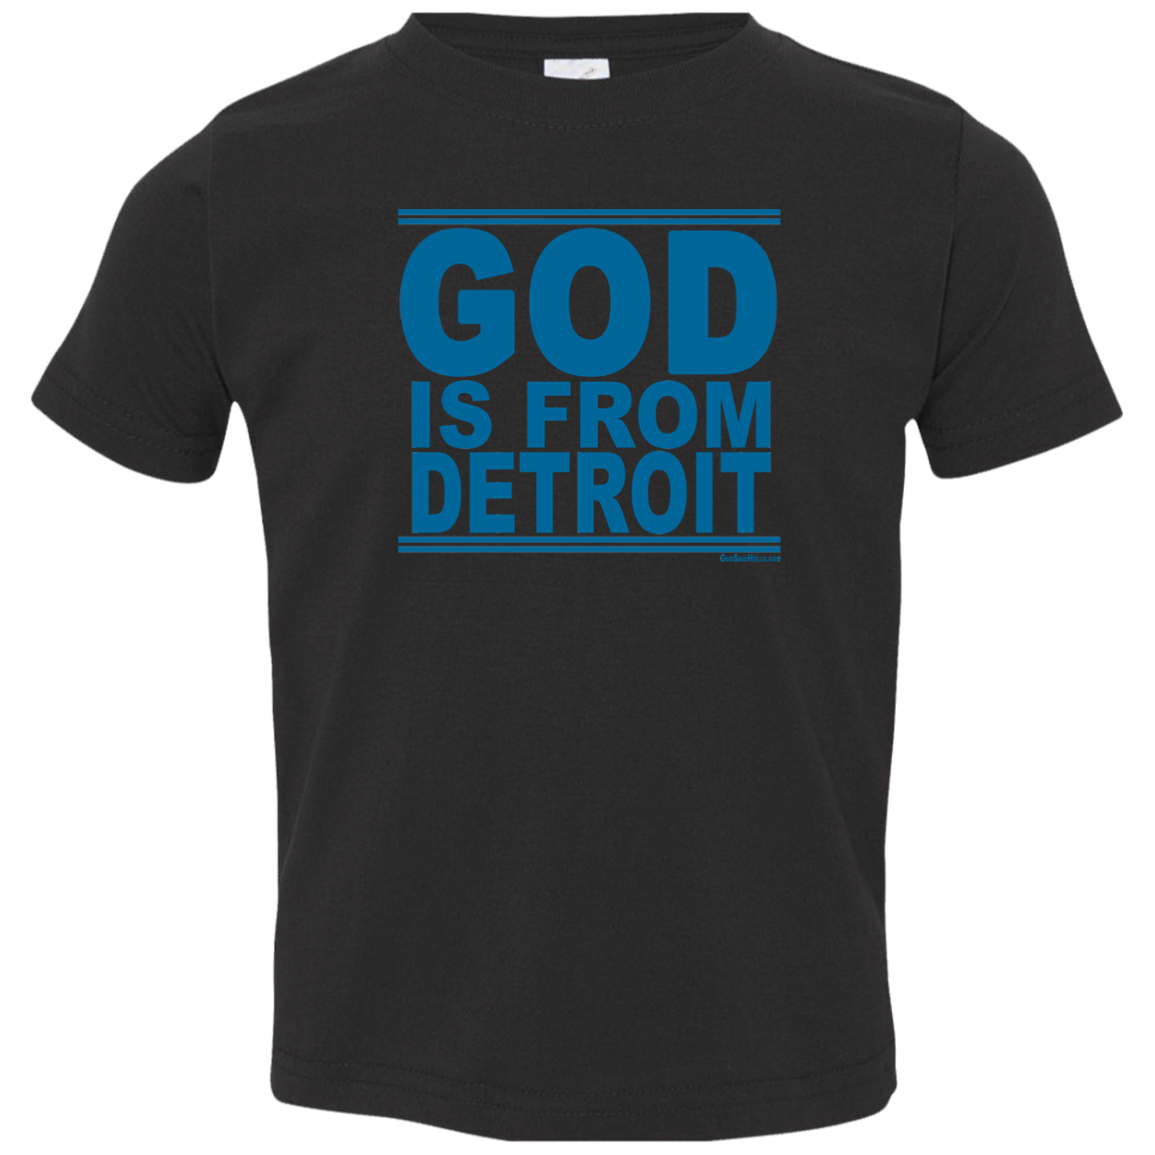 #GodIsFromDetroit - Toddler Tee (Special Edition)